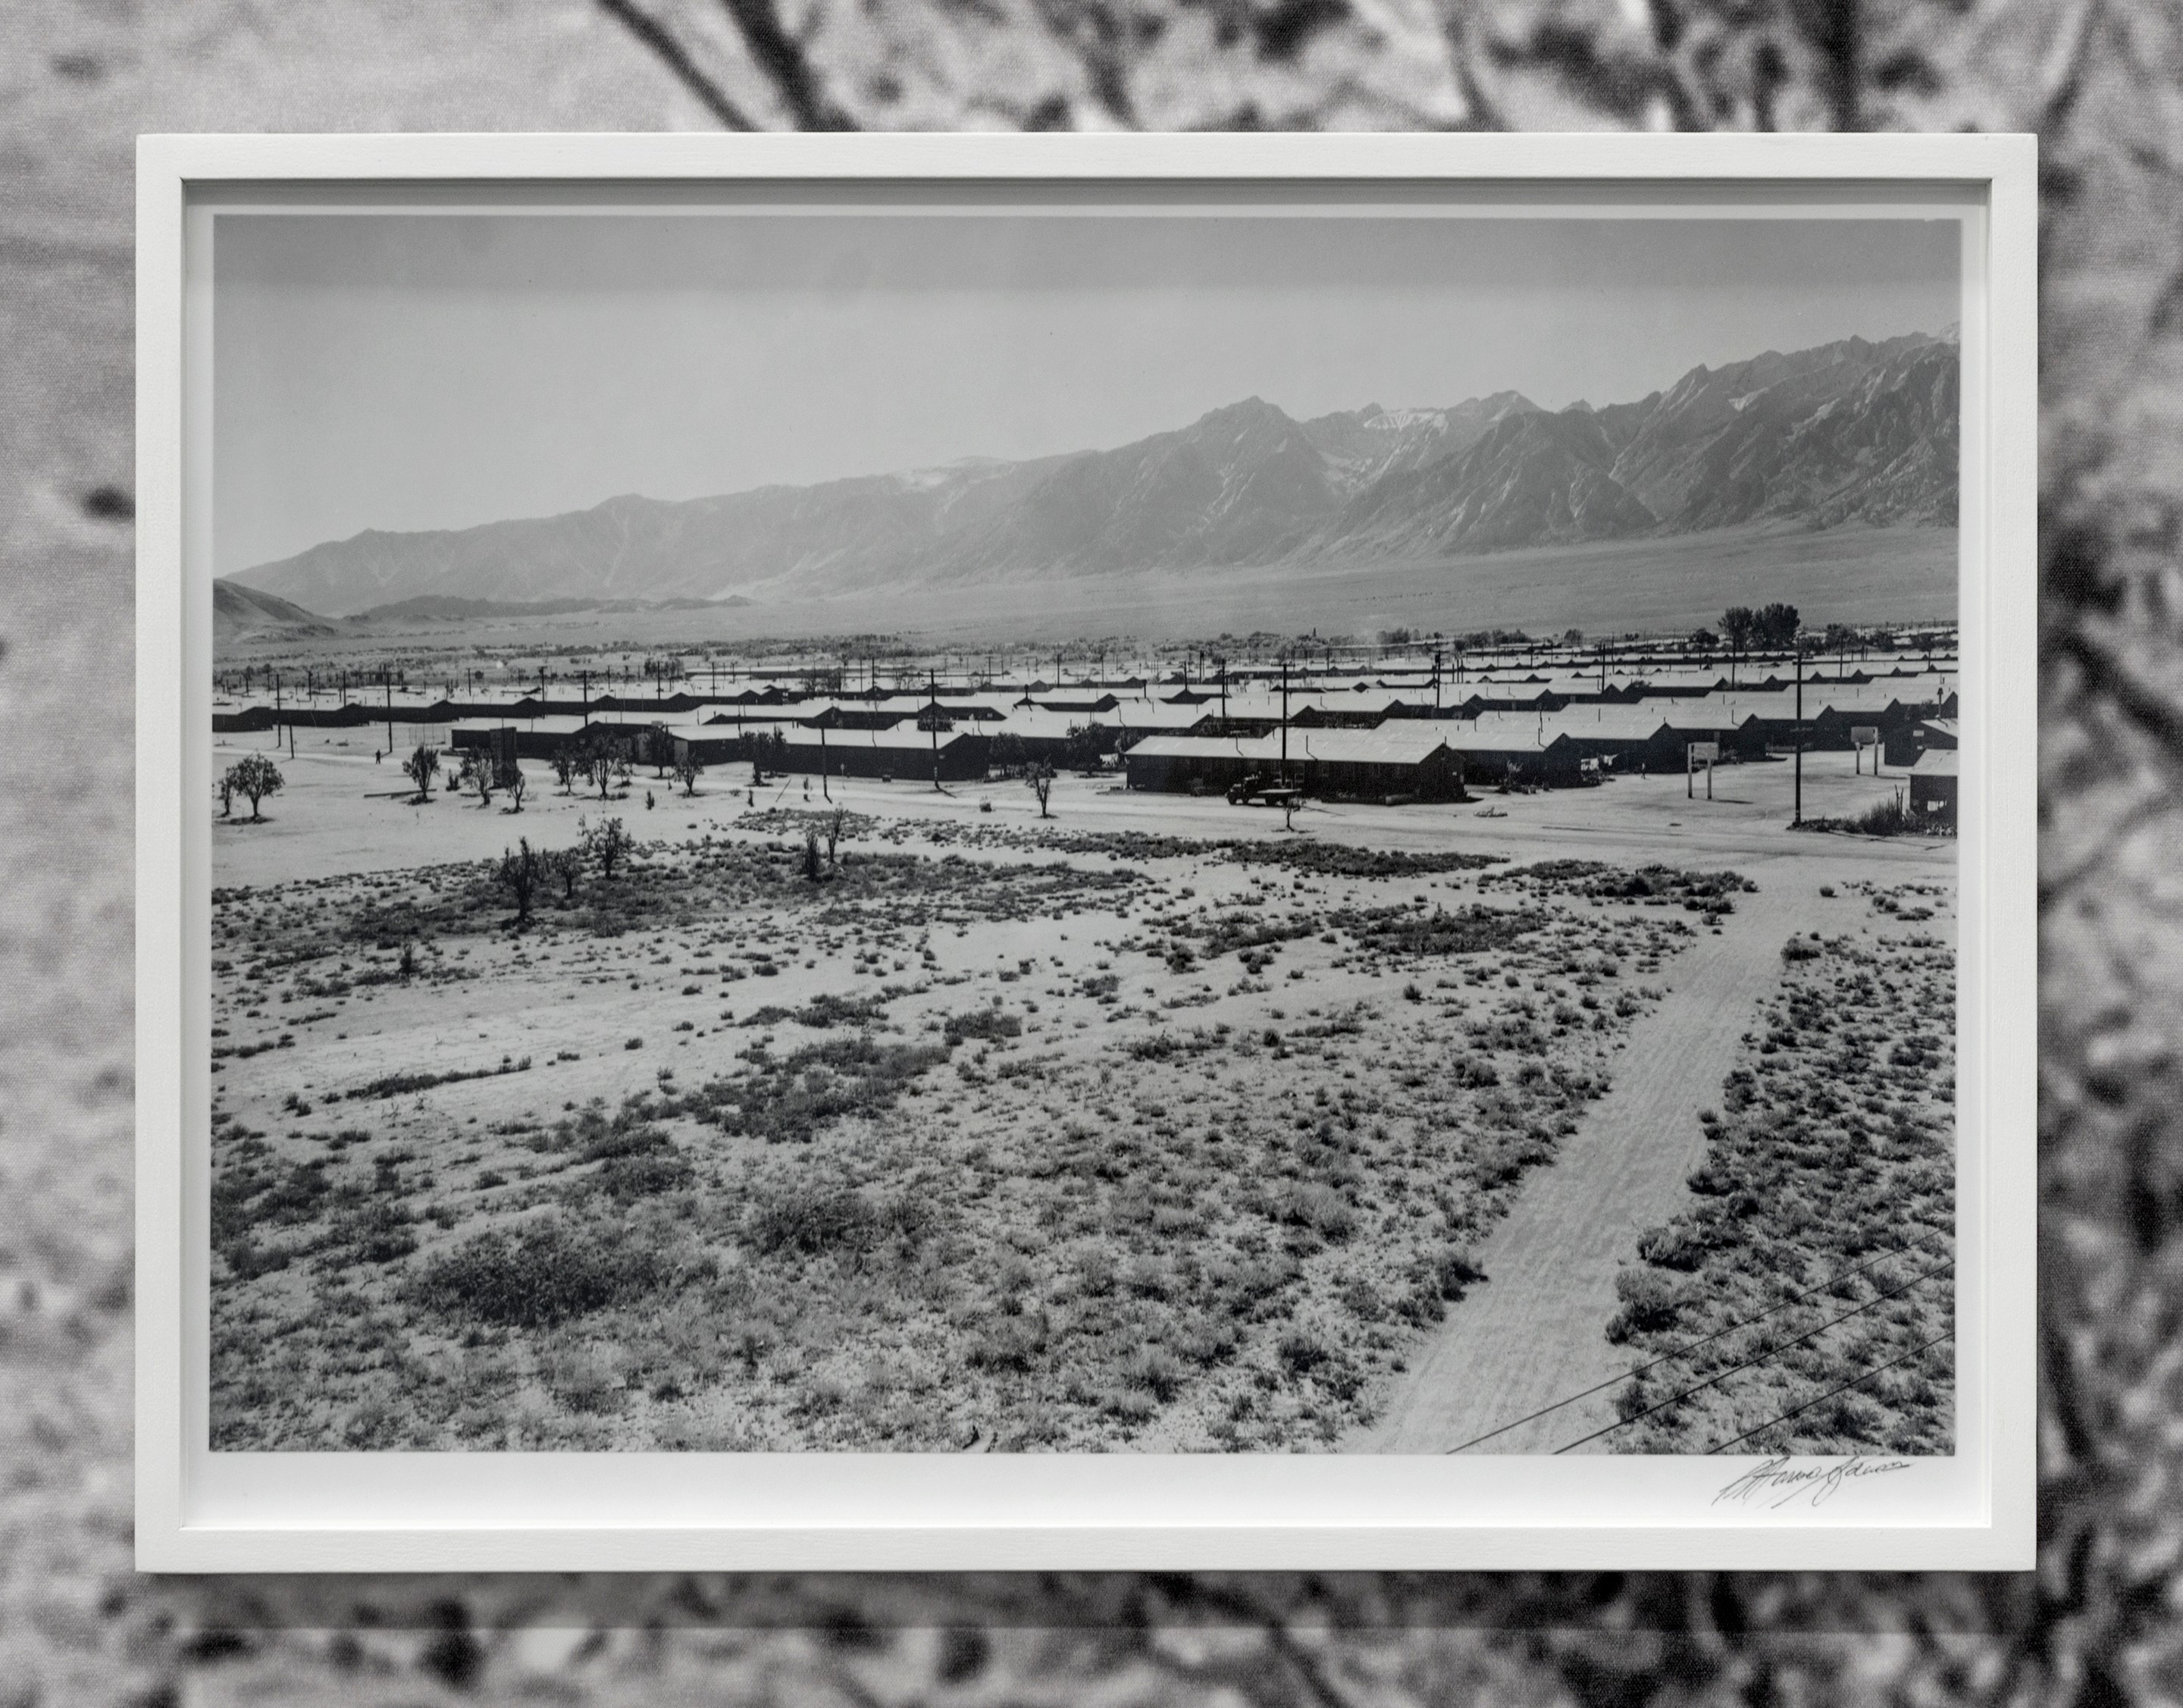 Ansel Adams, Manzanar from guard tower, summer heat, view SW, Manzanar Relocation Center, 1943 (Scanned Reproduction)(Sherrie Levine After Walker Evans) (2019)
Framed archival pigment print. 

14.5h x 19.25w inches (37h x 49w cm)